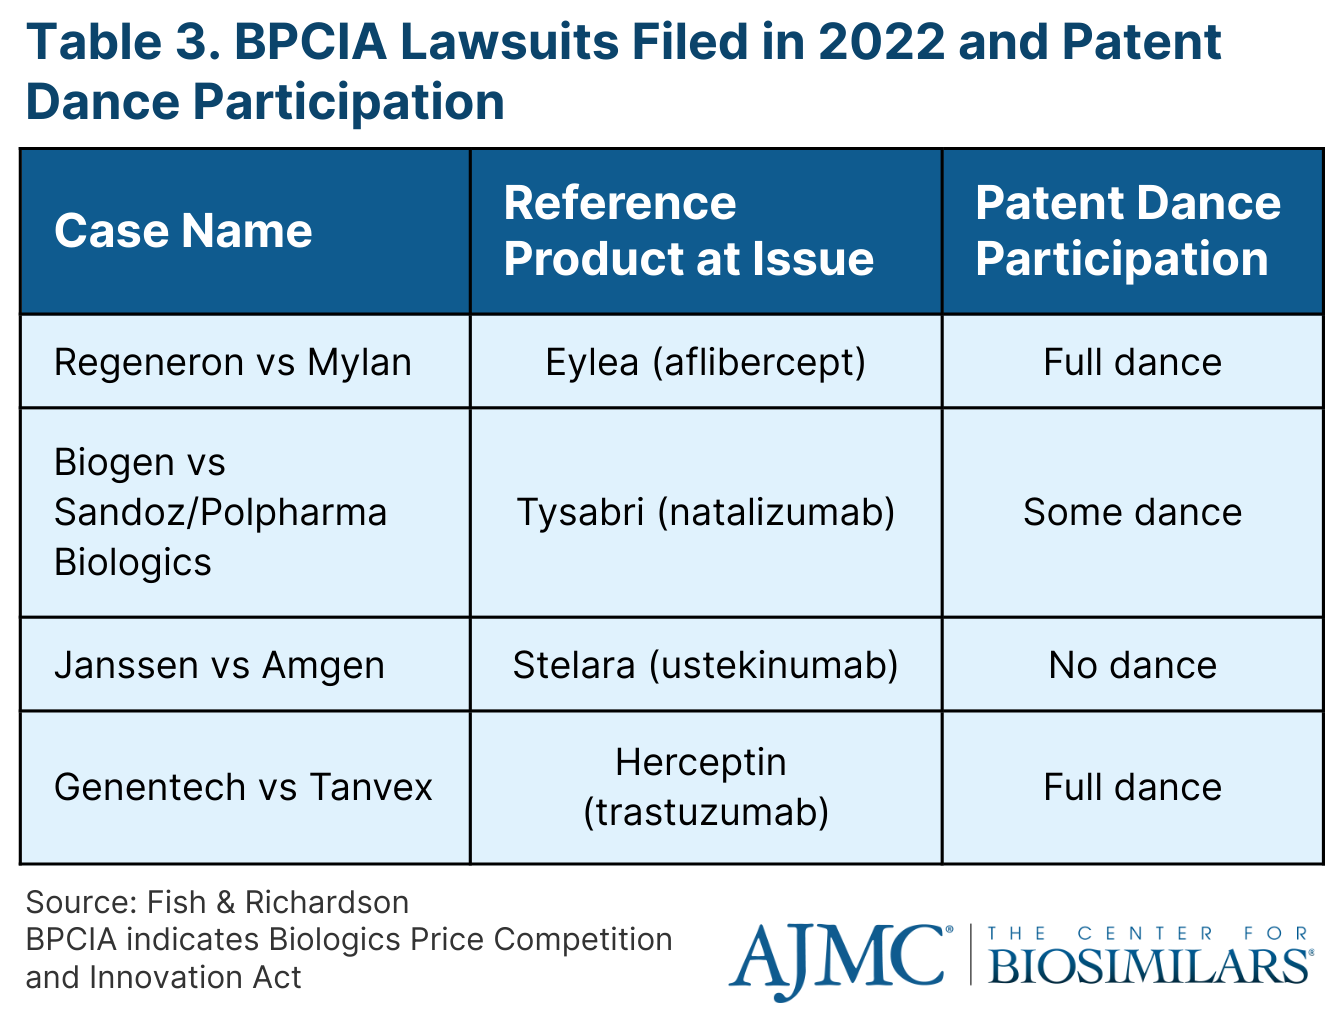 Table 3. BPCIA Lawsuits Filed in 2022 and Patent Dance Participation